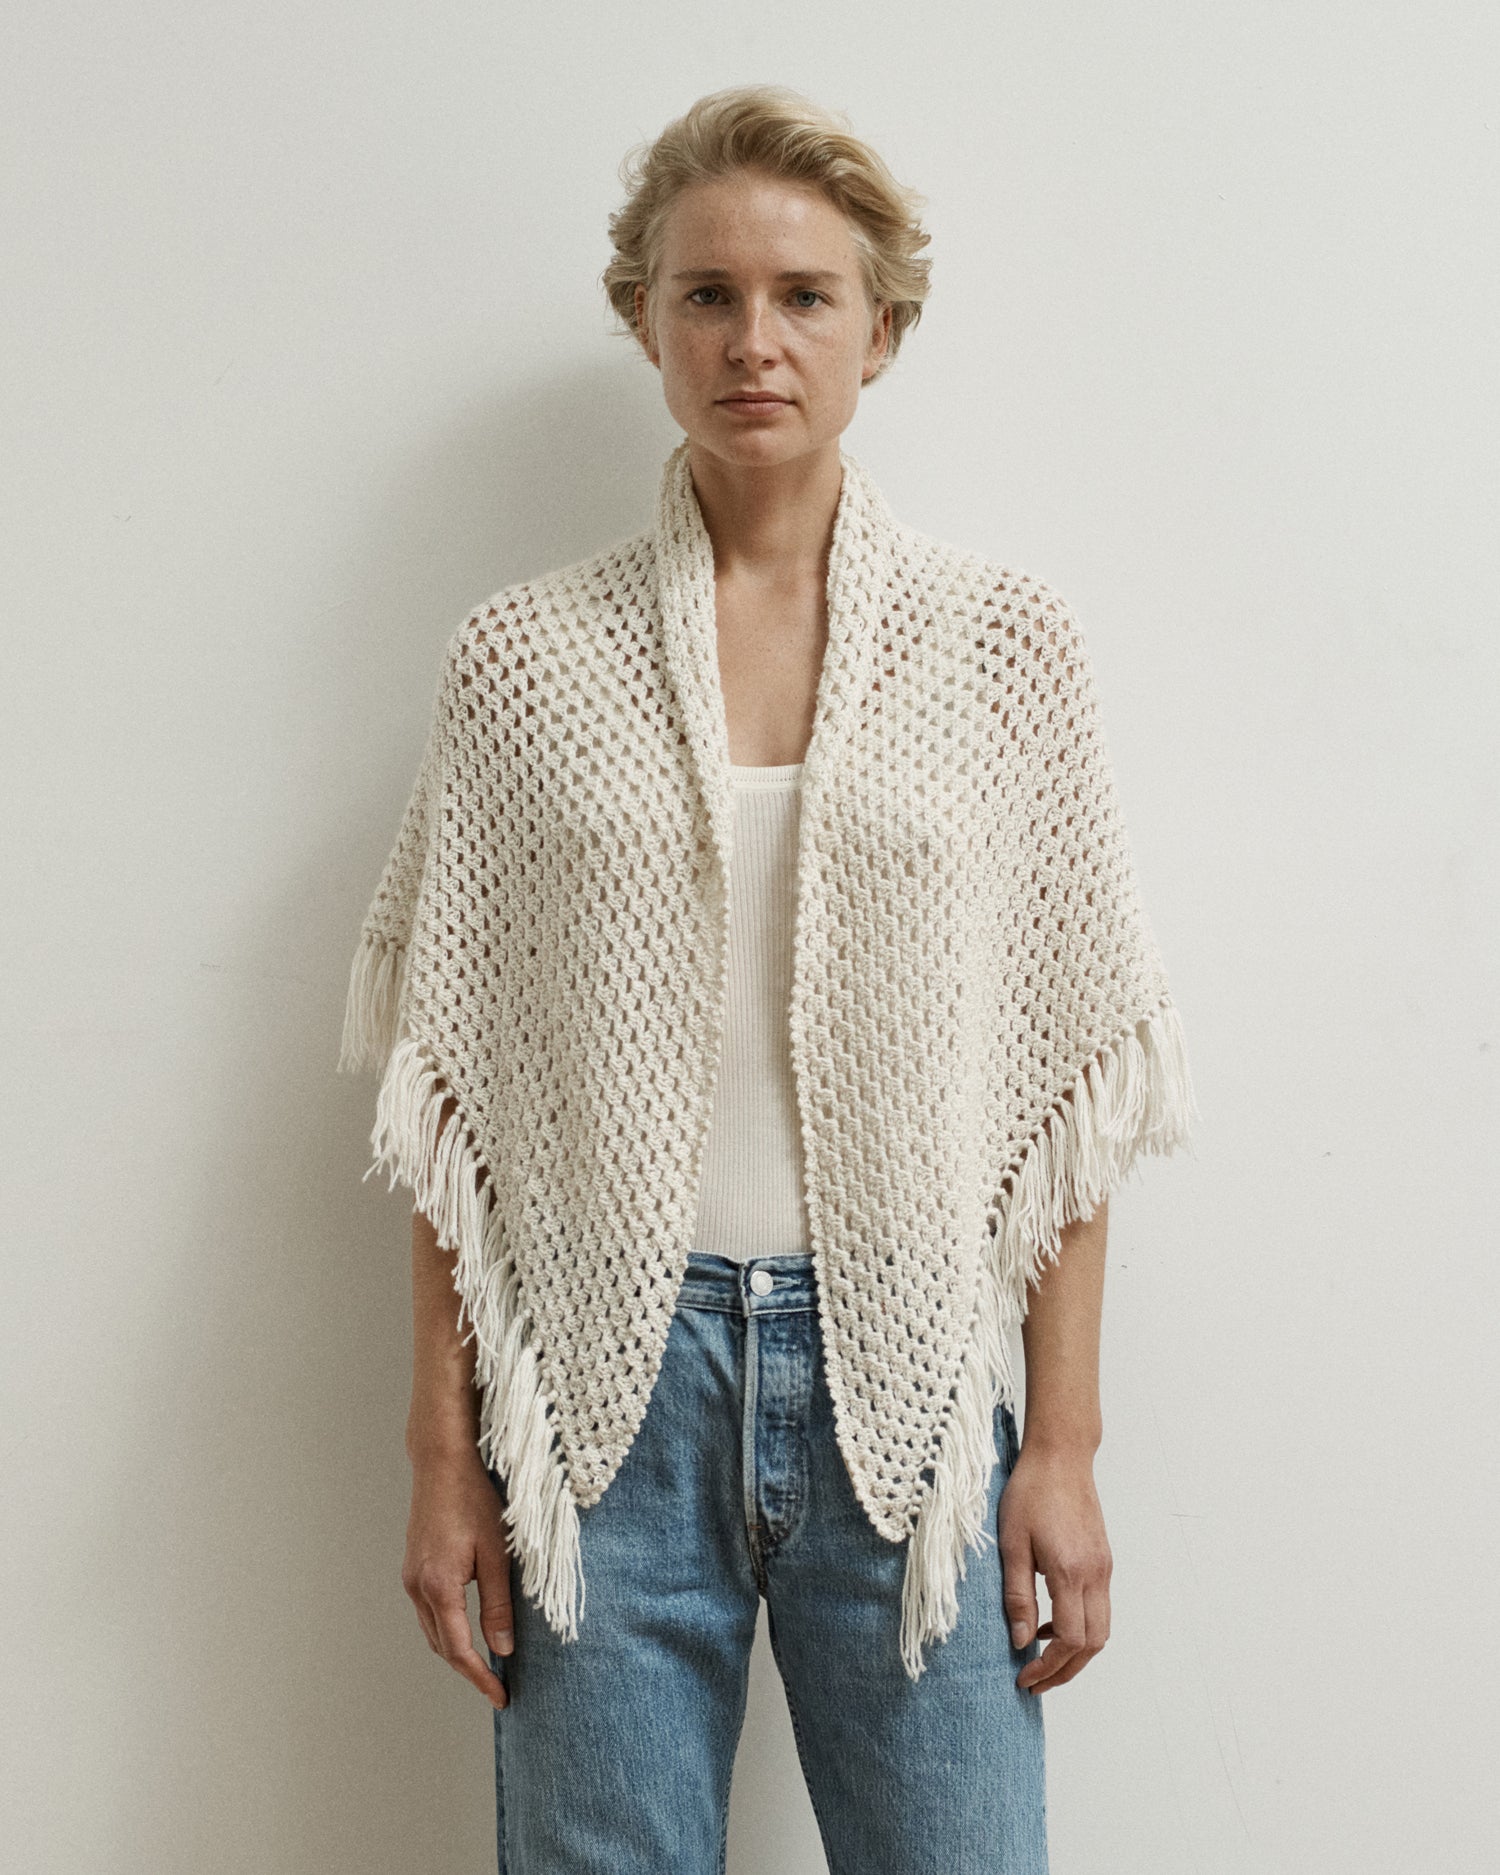 Woman standing with a cream-colored shawl draped over her shoulders. Shawl is hand-crocheted and has fringe.